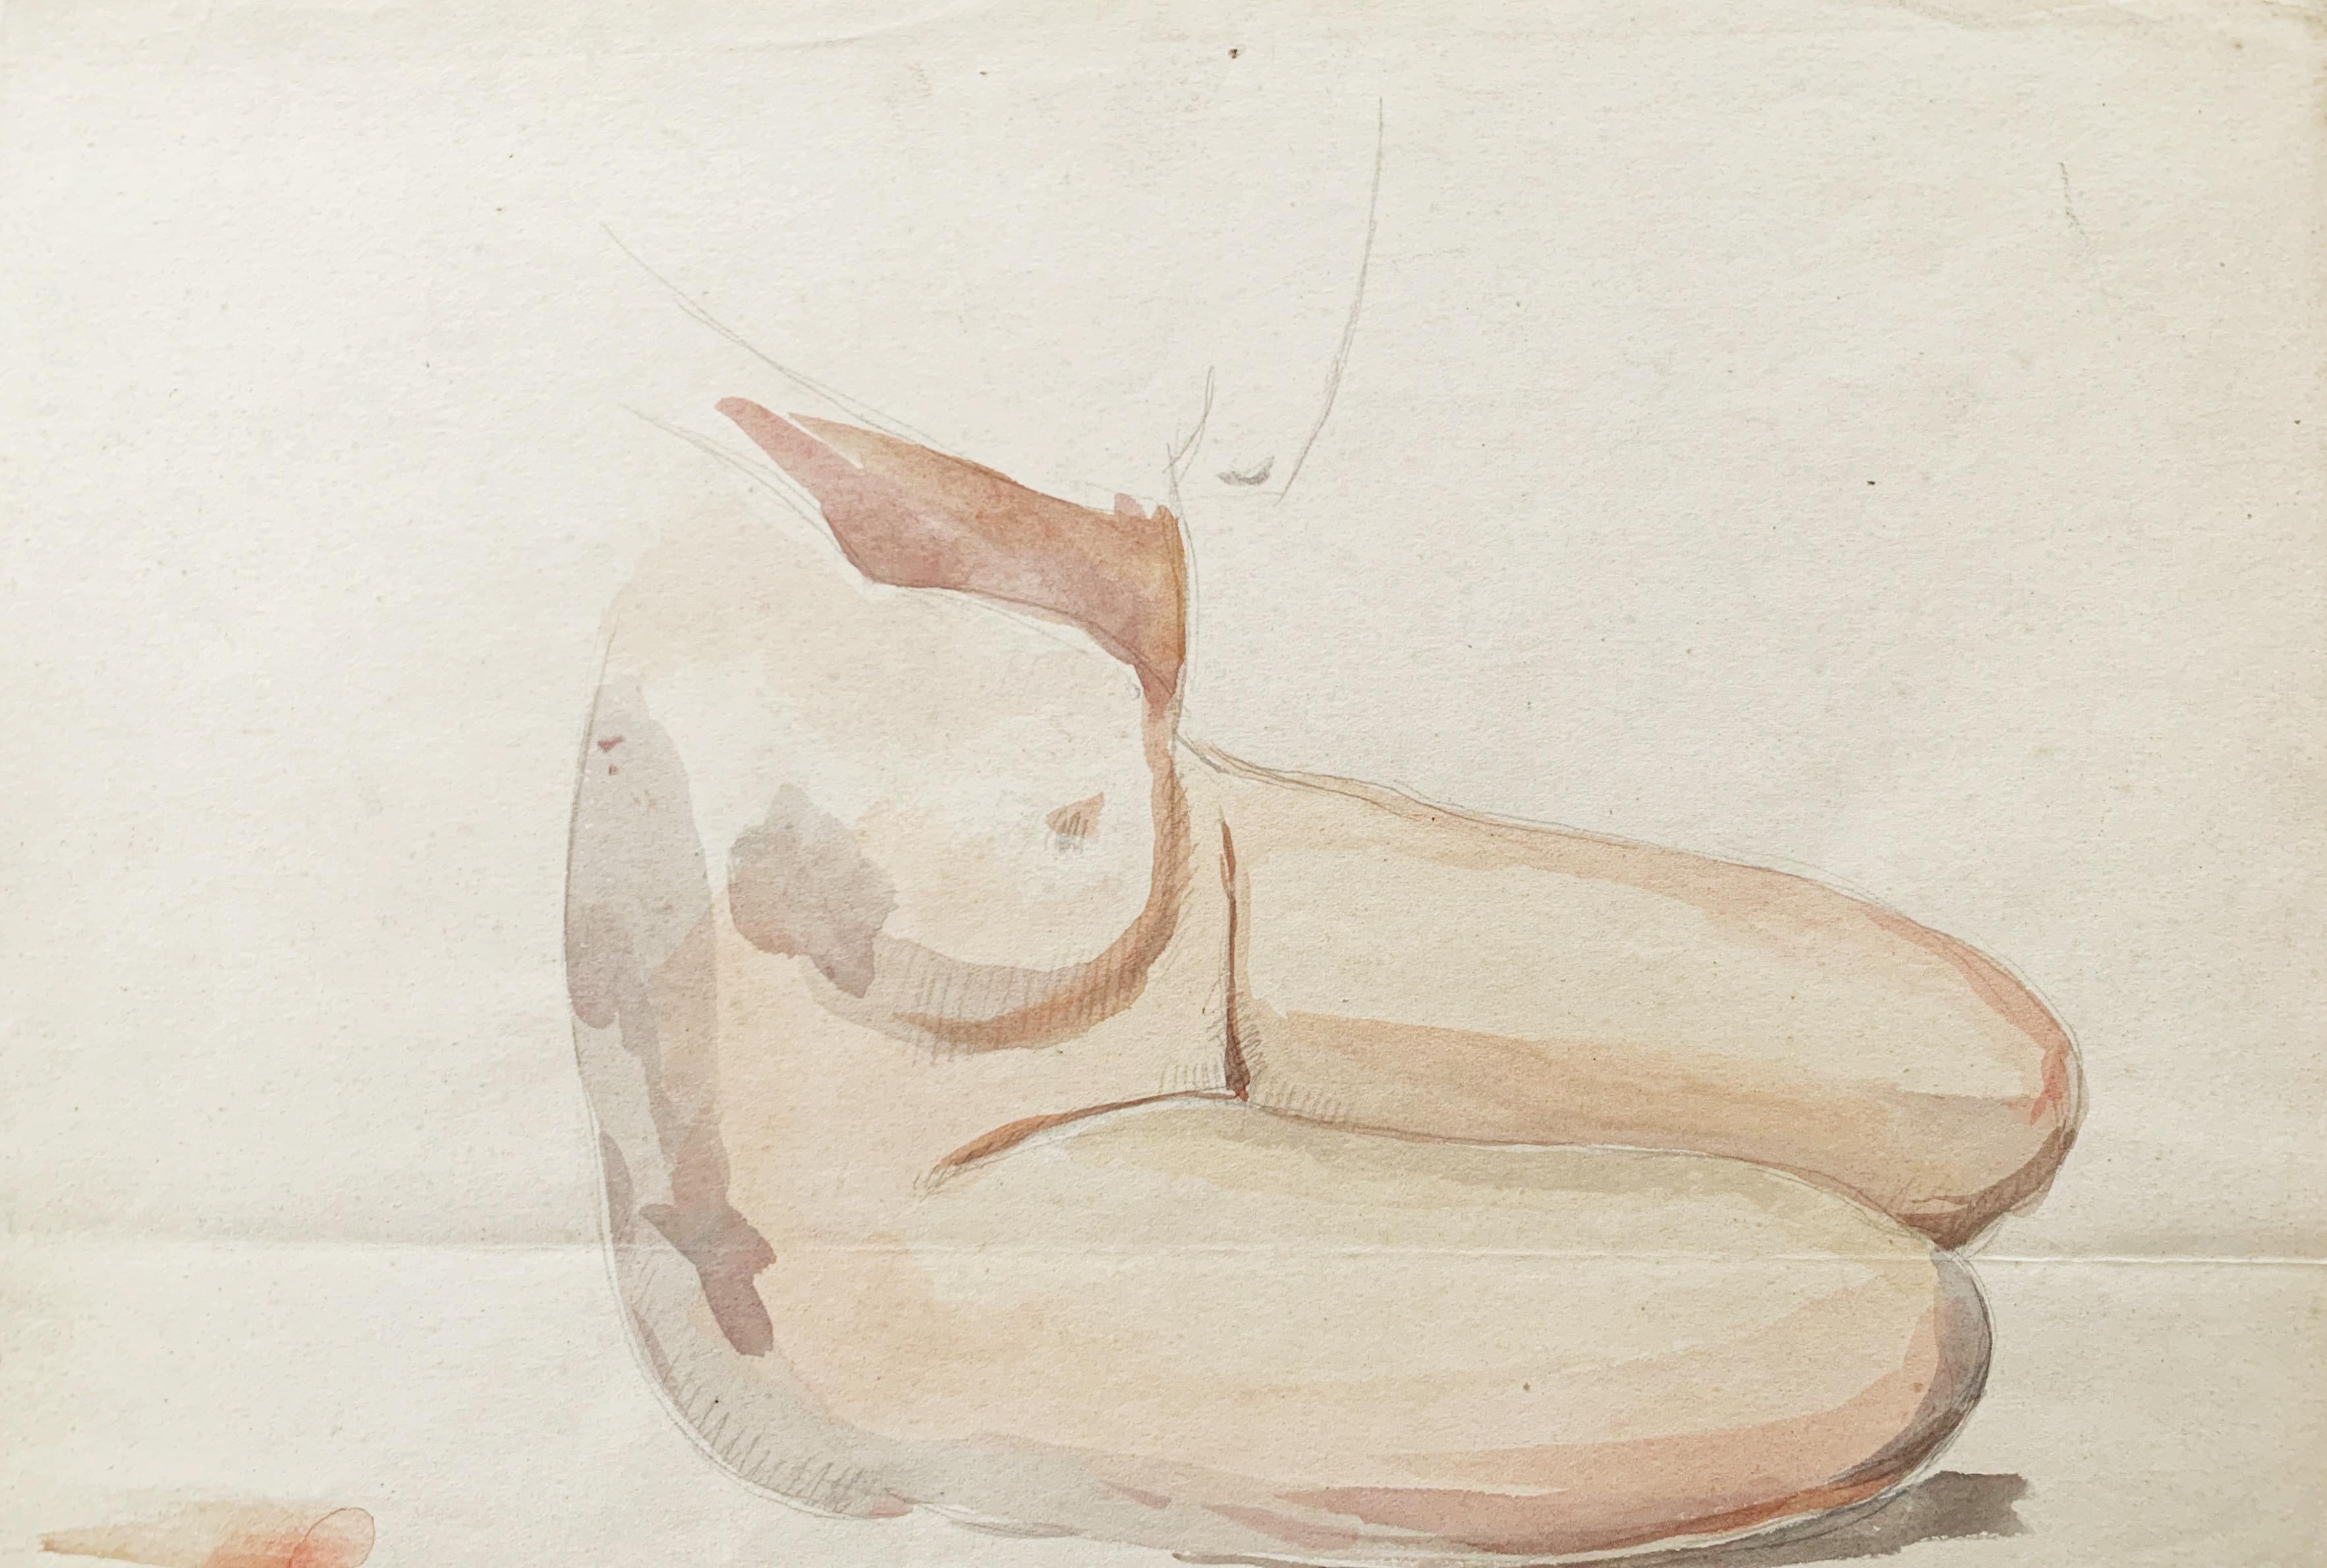 Raphaël DELORME (1886-1962)
Study
Watercolor and pencil on paper
21 x 31 cm
frame 30 x 40 cm
Trace of fold in the bottom

Born in 1885 in Bordeaux, Raphaël Delorme is one of the major figures of the so-called "Art Deco" painting. He received his